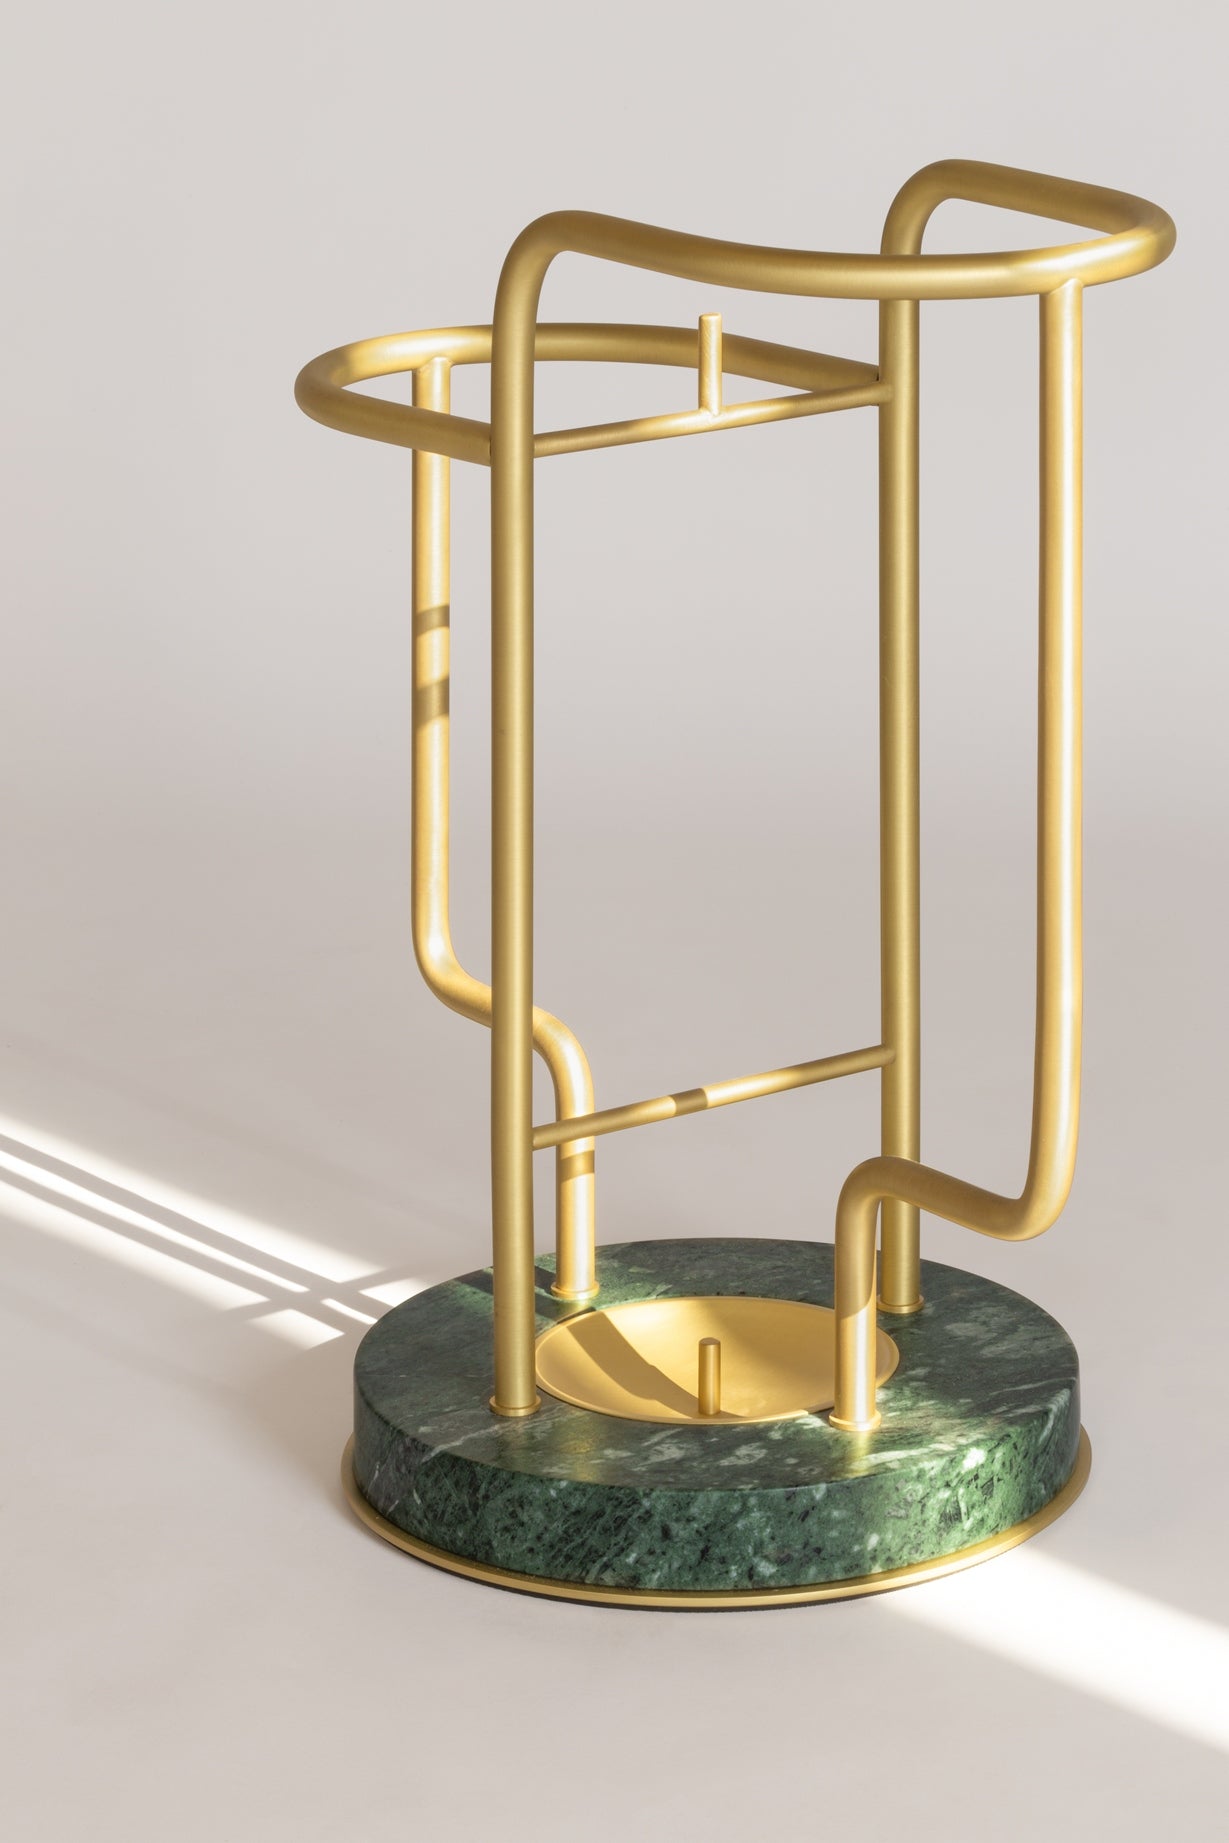 Giobagnara Vincent Metal Umbrella Stand with Marble Base | Elegant Design with Marble Base | Stylish and Functional Entryway Decor | Explore a Range of Luxury Home Accessories at 2Jour Concierge, #1 luxury high-end gift & lifestyle shop